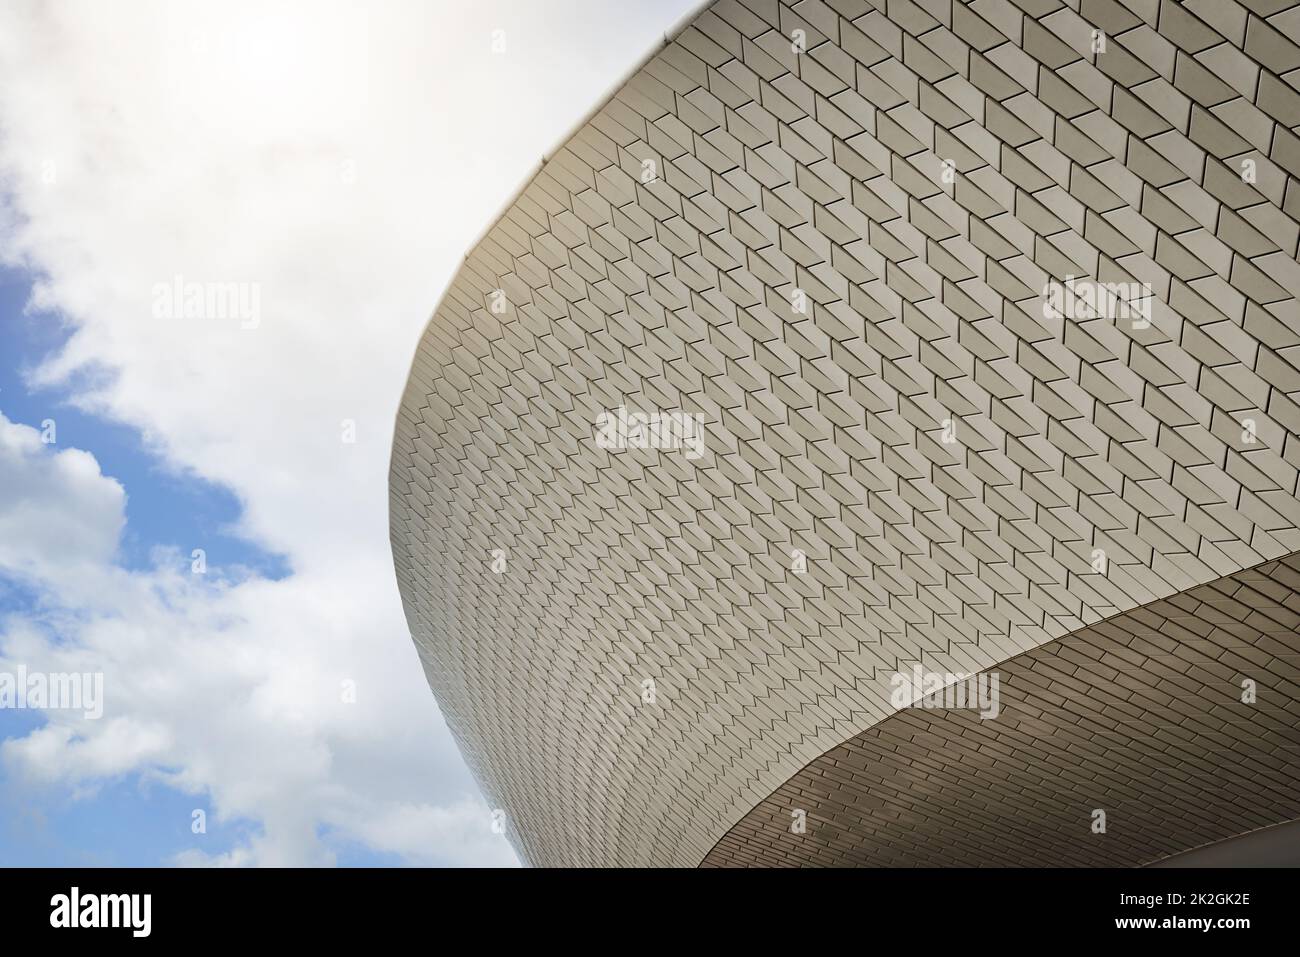 Its a world class stadium. Low angle shot of a sports stadium with clouds in the background outside during the day. Stock Photo